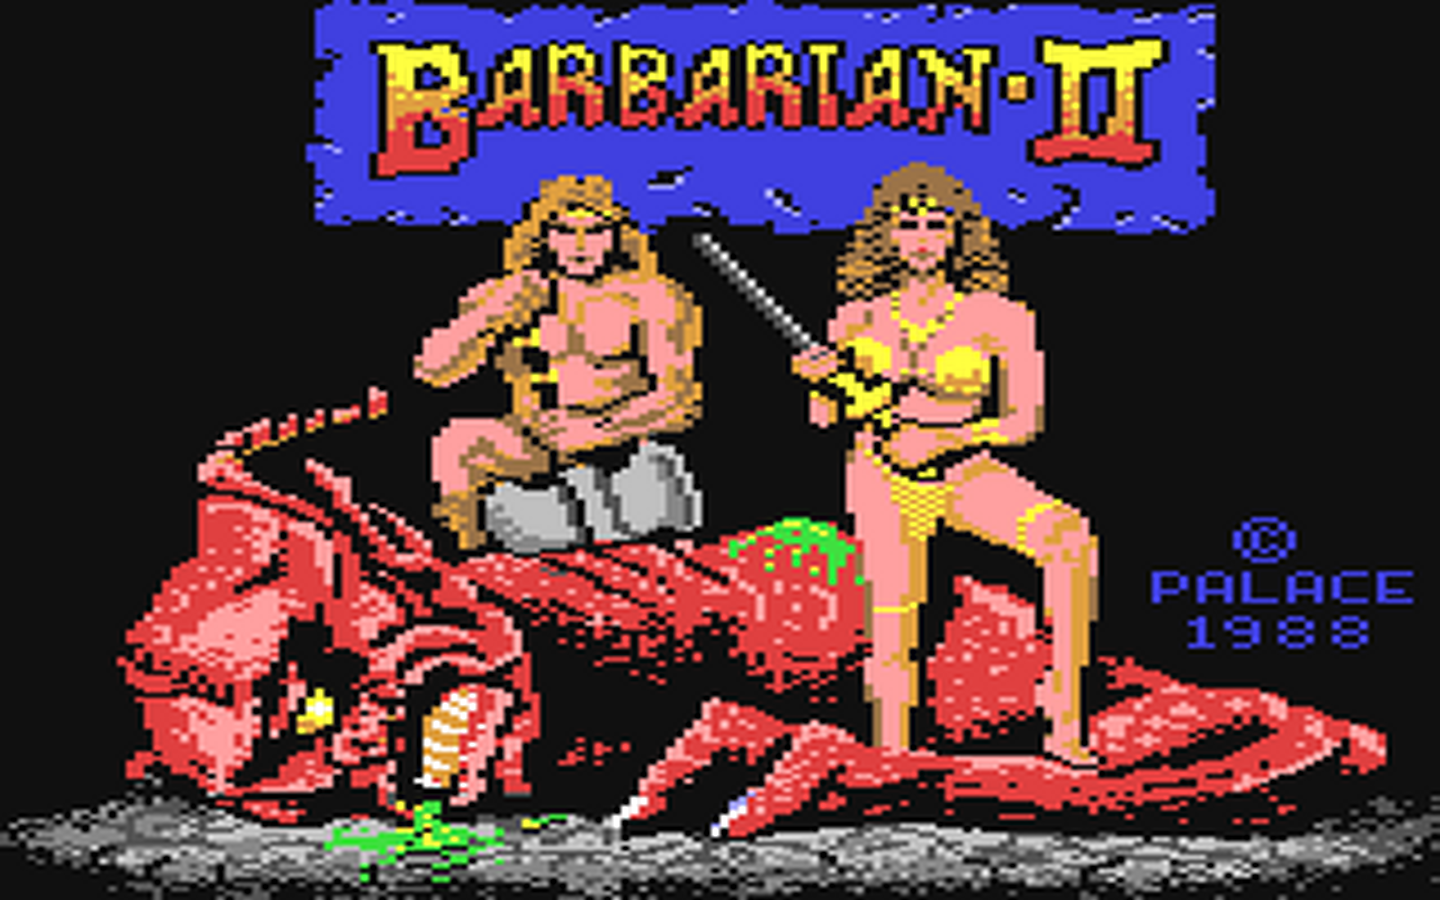 C64 GameBase Barbarian_II_-_The_Dungeon_of_Drax Palace_Software 1988